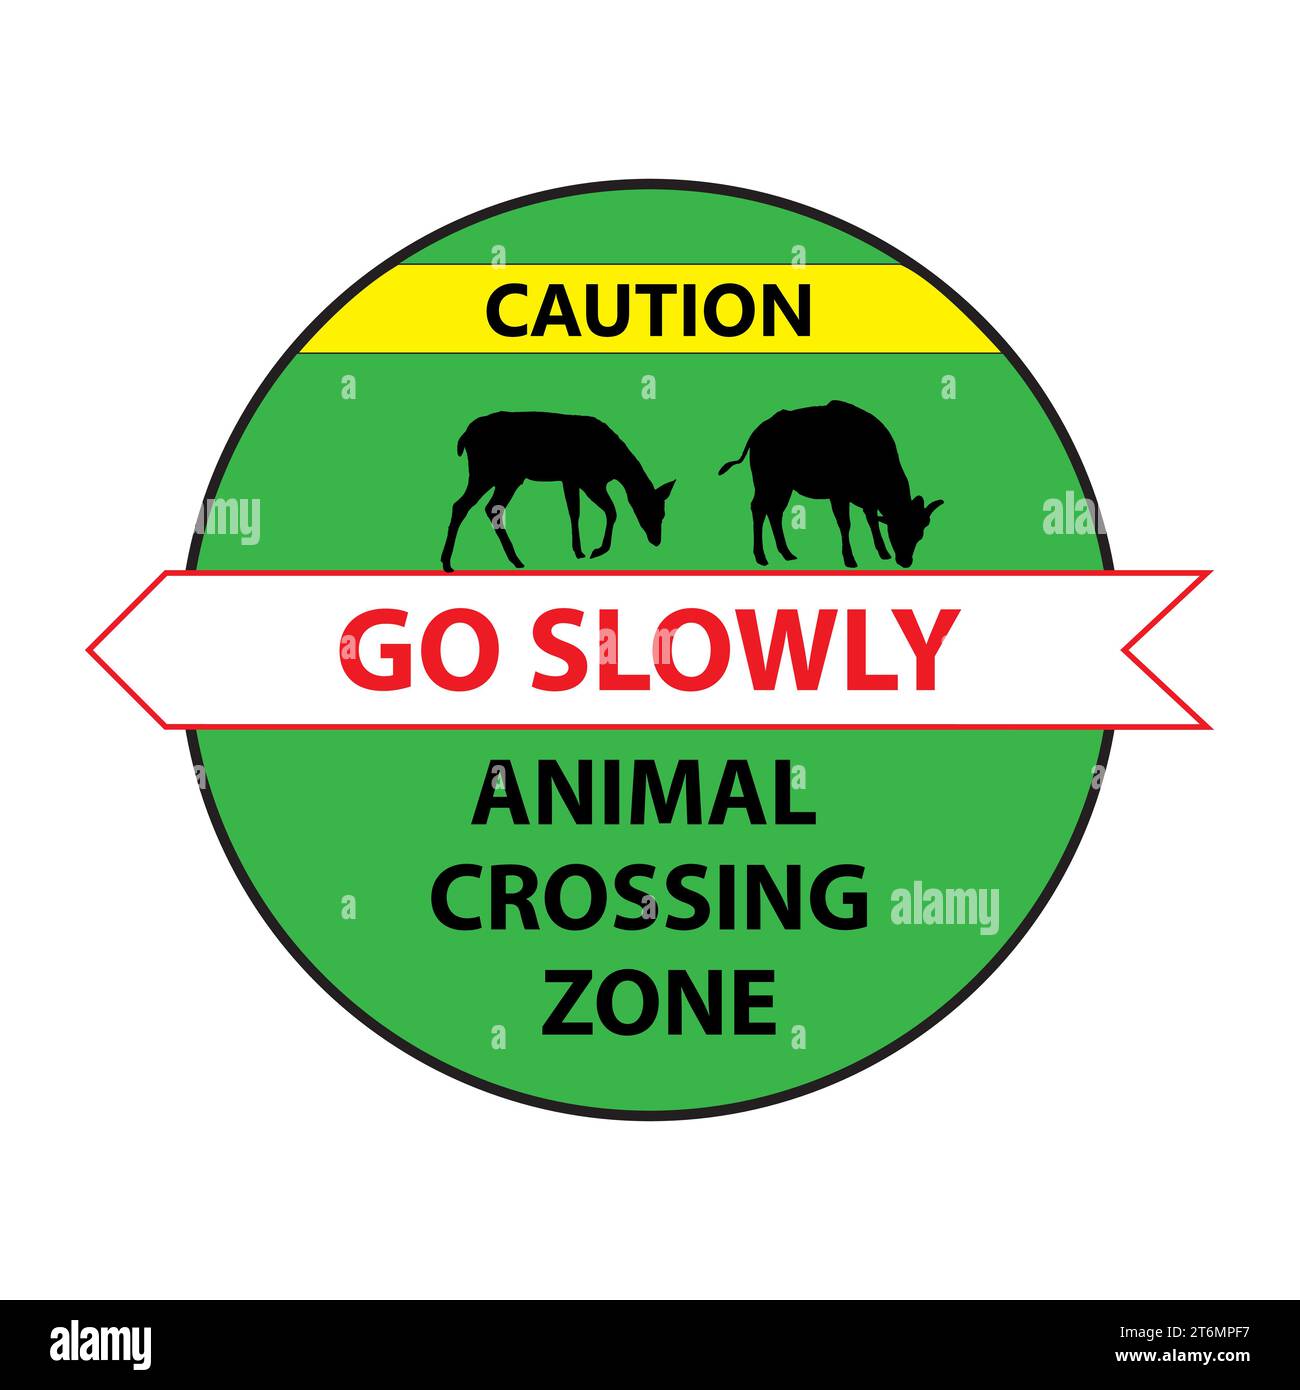 road sign: Animal Crossing Zone. Deer and willd ox. Drive slowly for animal safety. Common on roads. Vector illustration on white background. Stock Vector